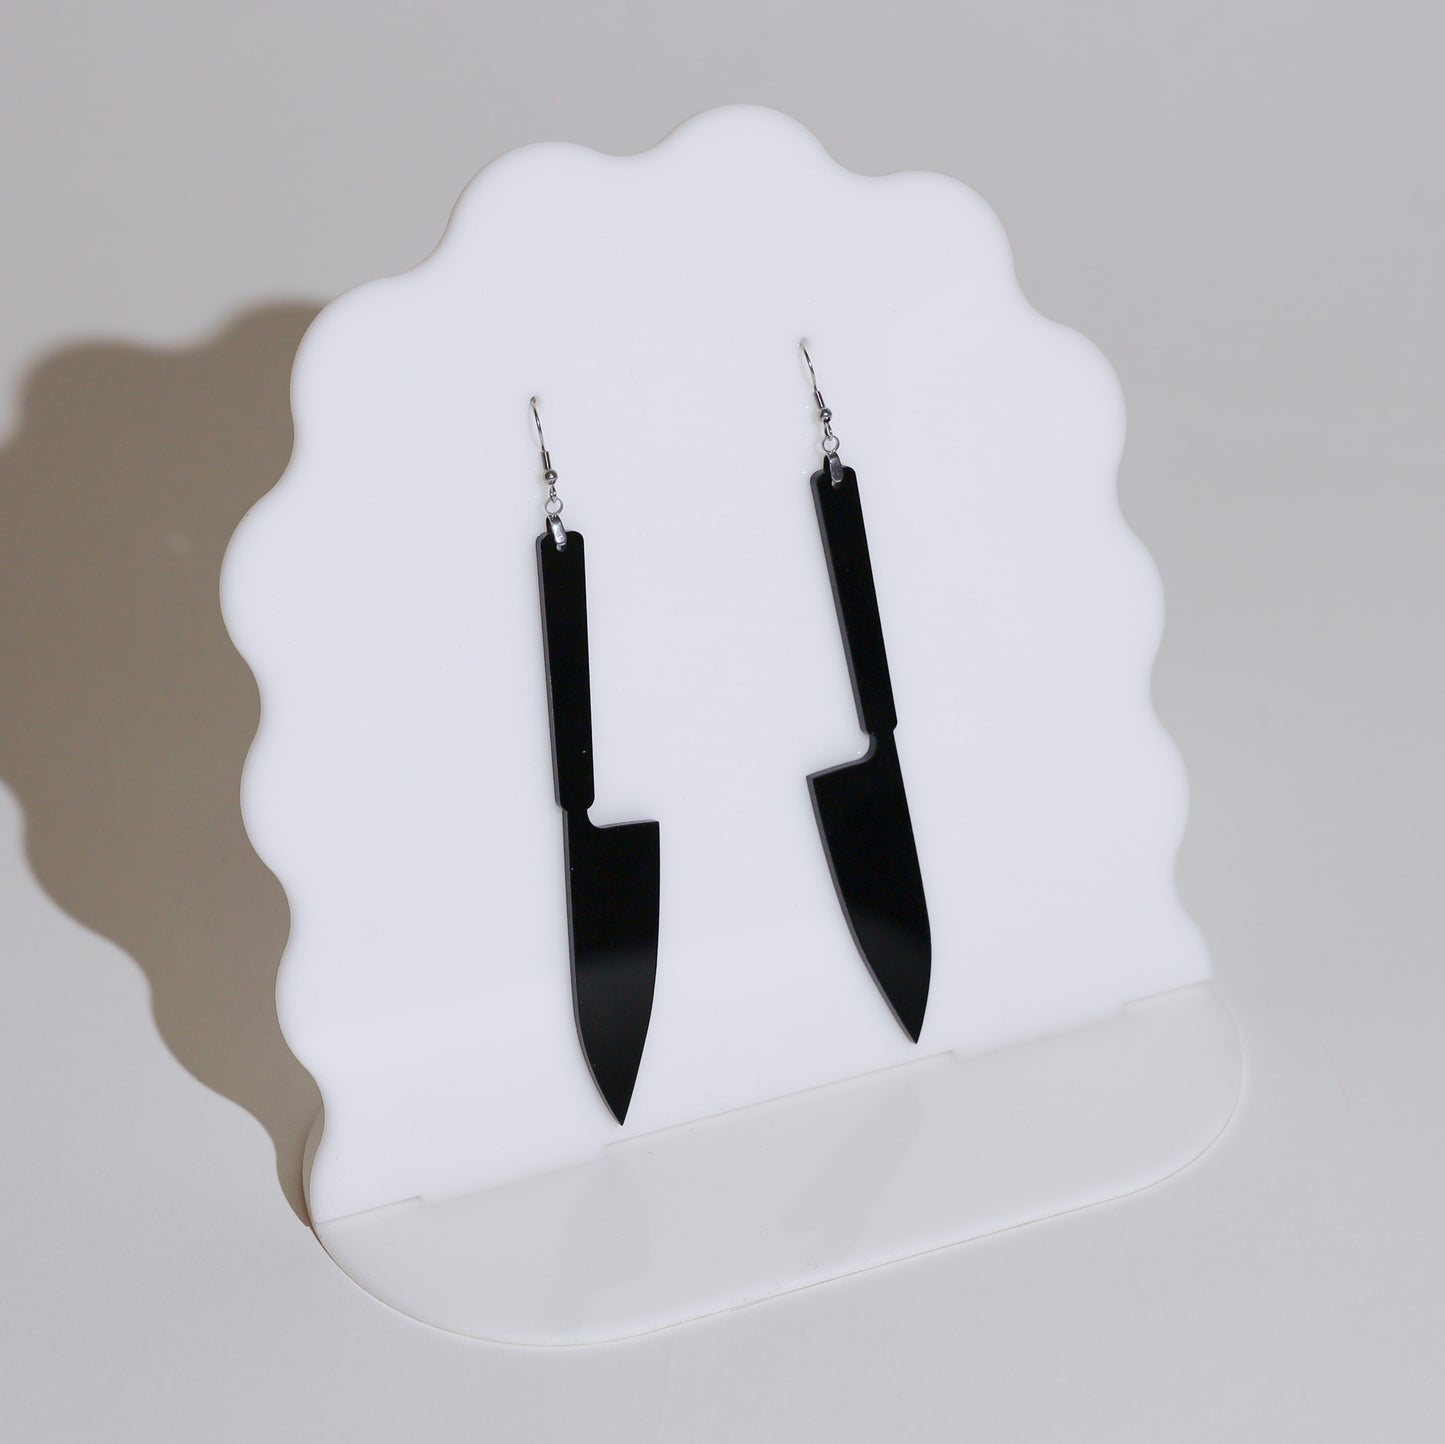 Cutting-Edge Fashion Earrings: Unique and eye-catching, these earrings feature knife motifs for a bold and modern look. Created by Our Family Designs.